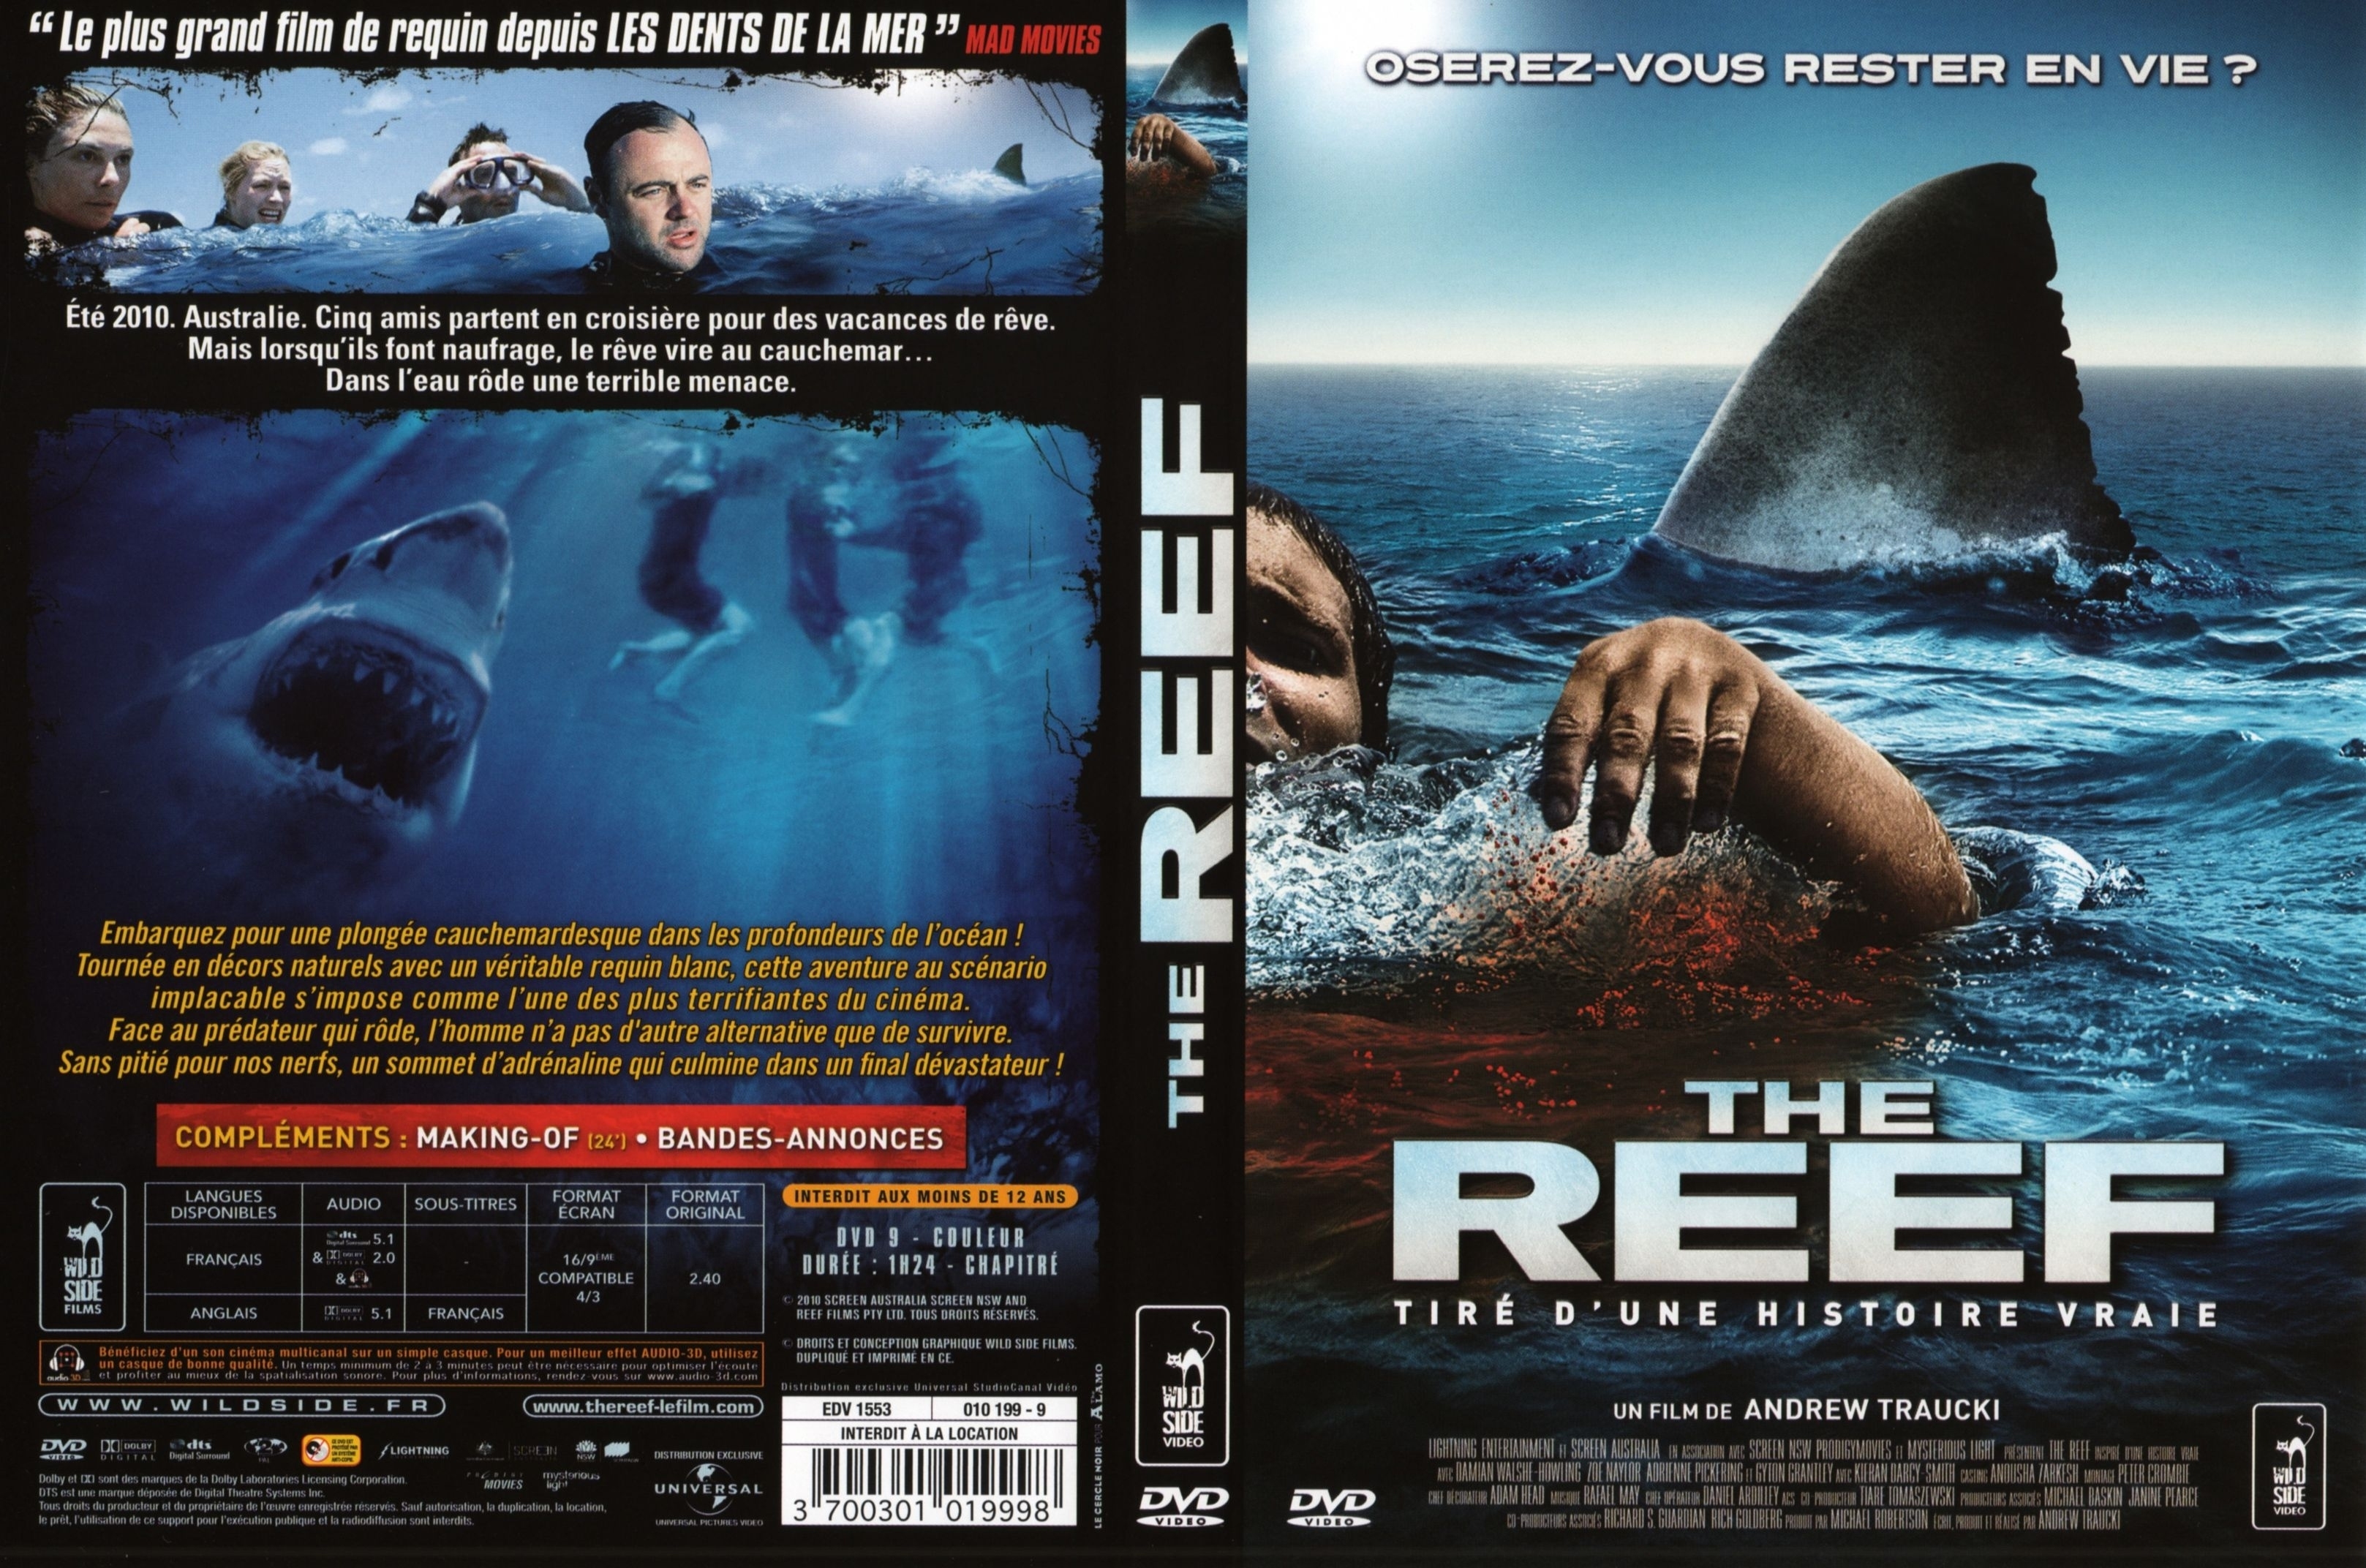 Jaquette DVD The reef